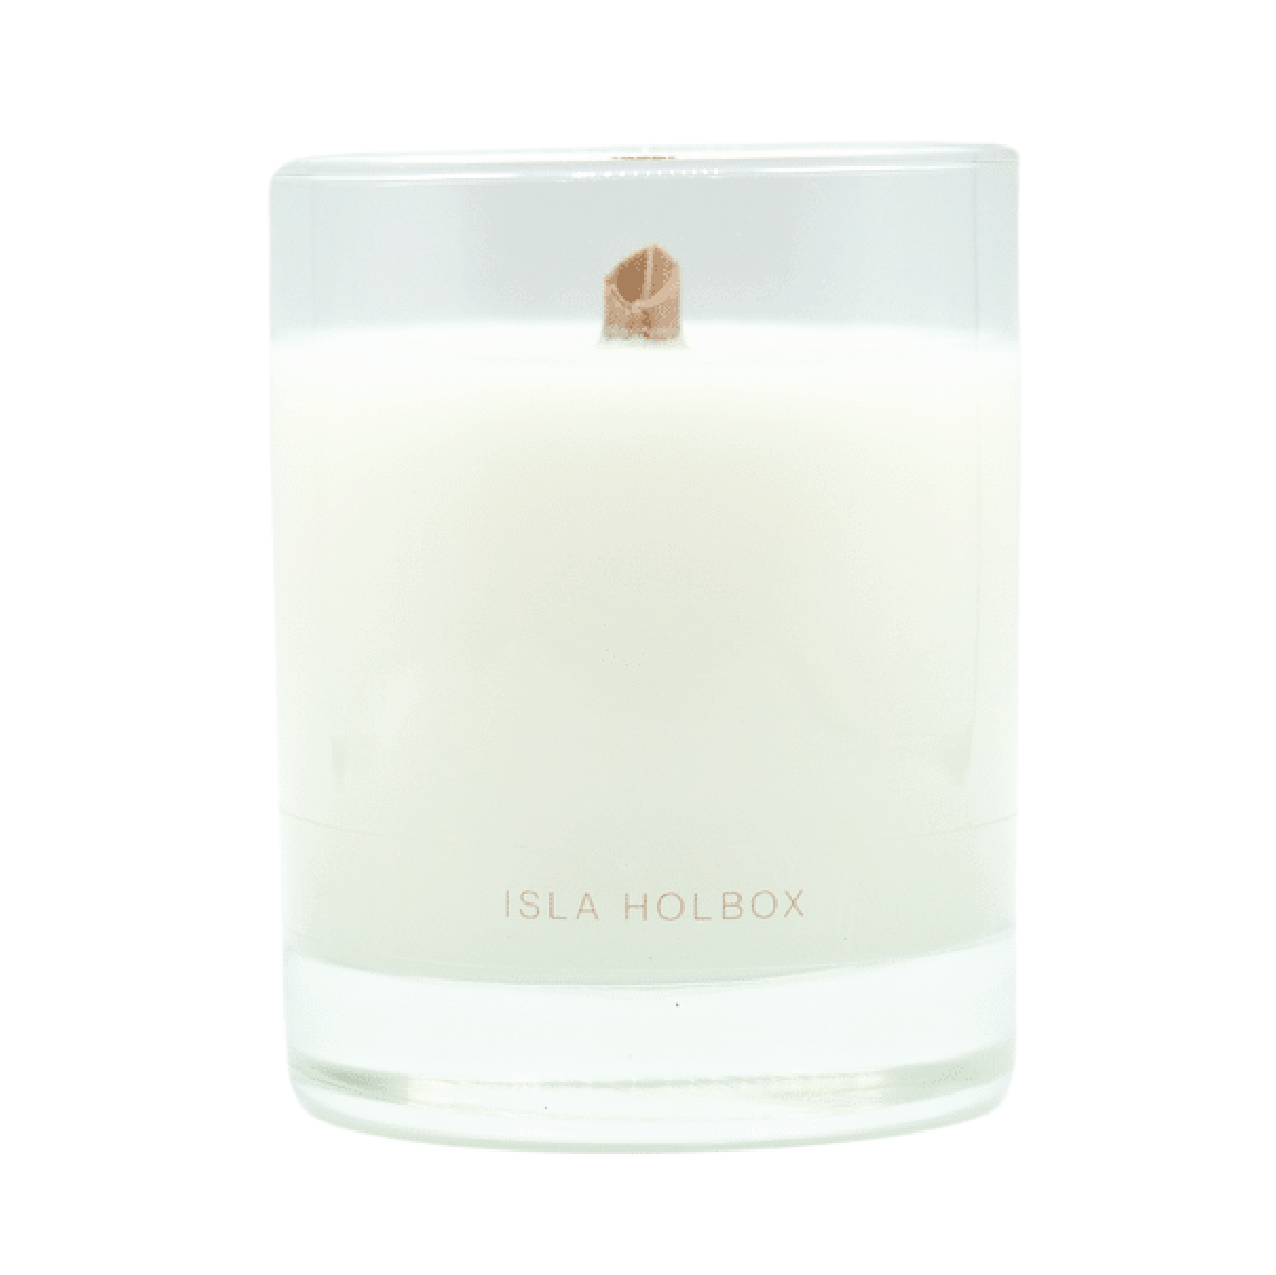 isla holbox - island interludes - scented candle - chinotto, palo santo, sage - the ooo collective